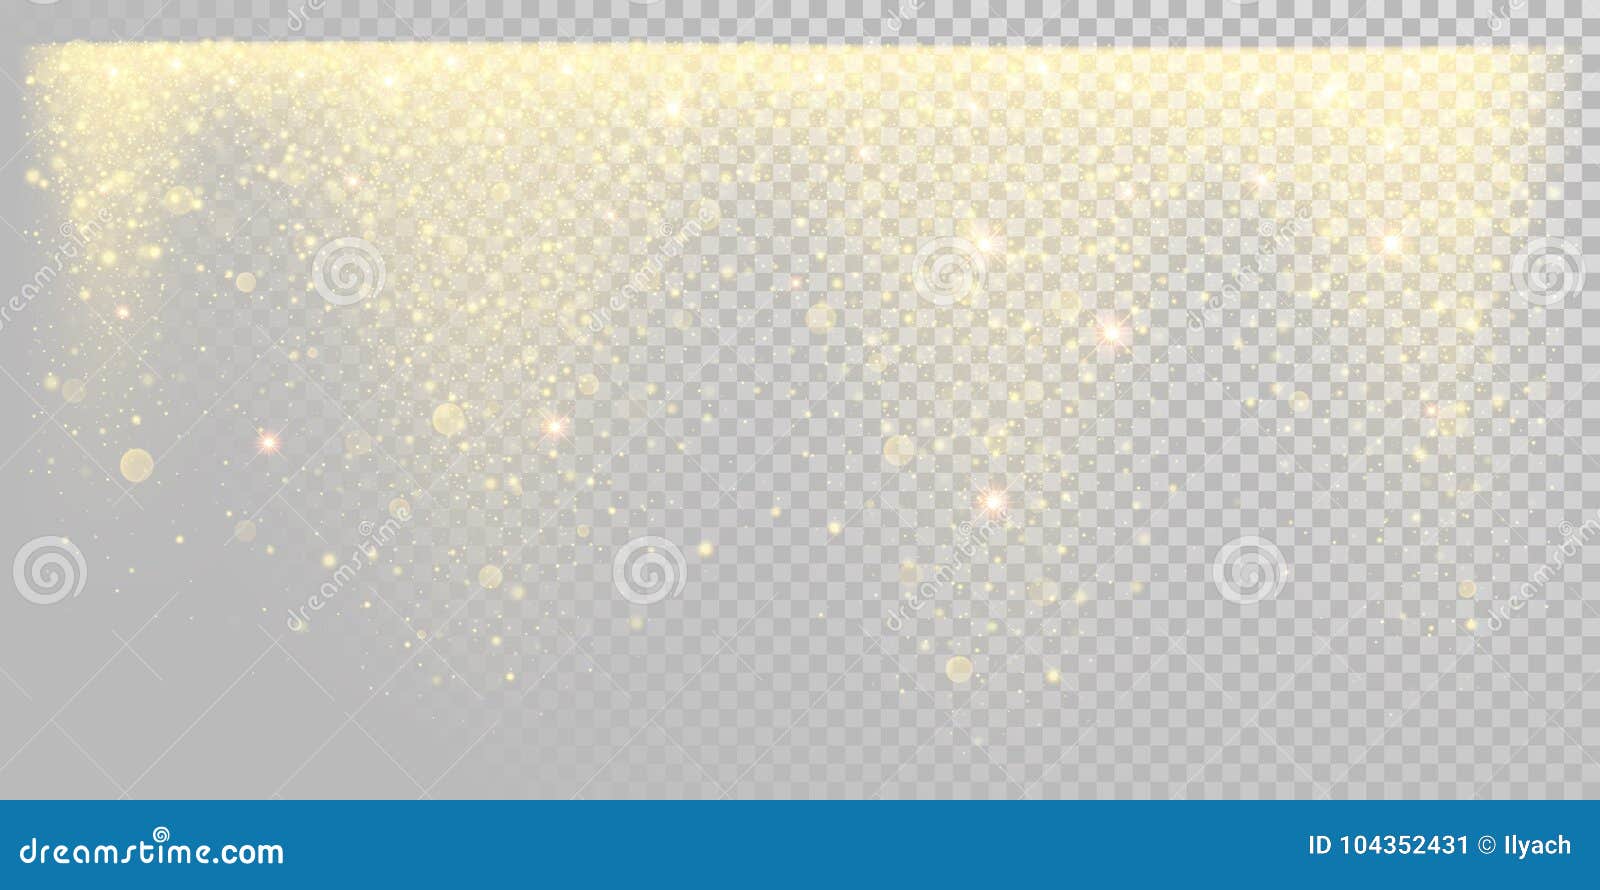 christmas holiday golden glitter snow or sparkling gold confetti on white background template.  golden particles light shine